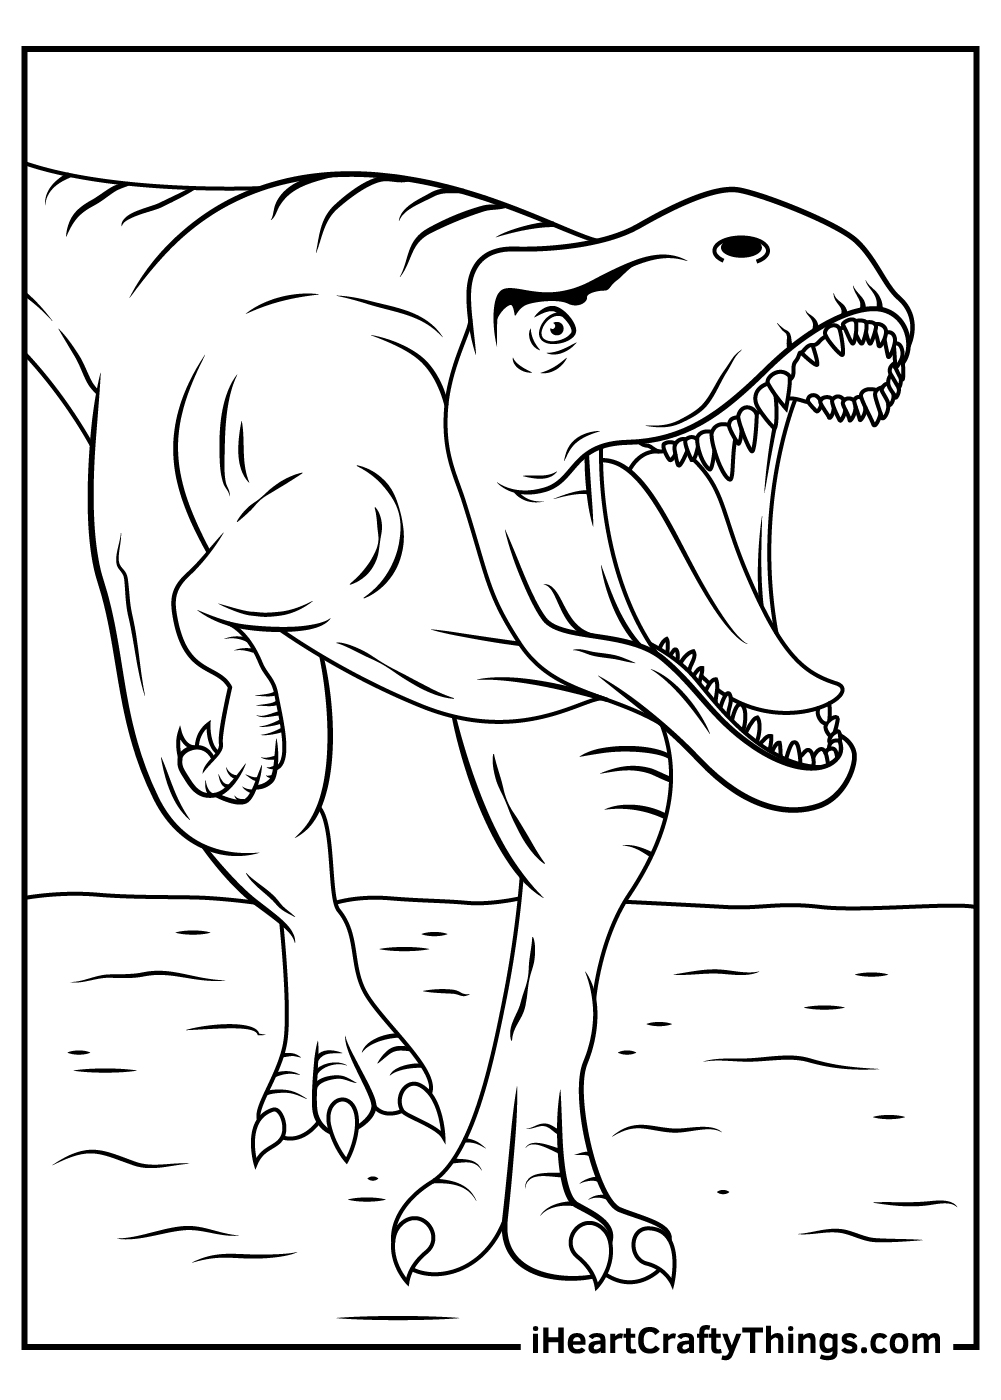 Jurassic World Coloring Pages Scorpius Rex